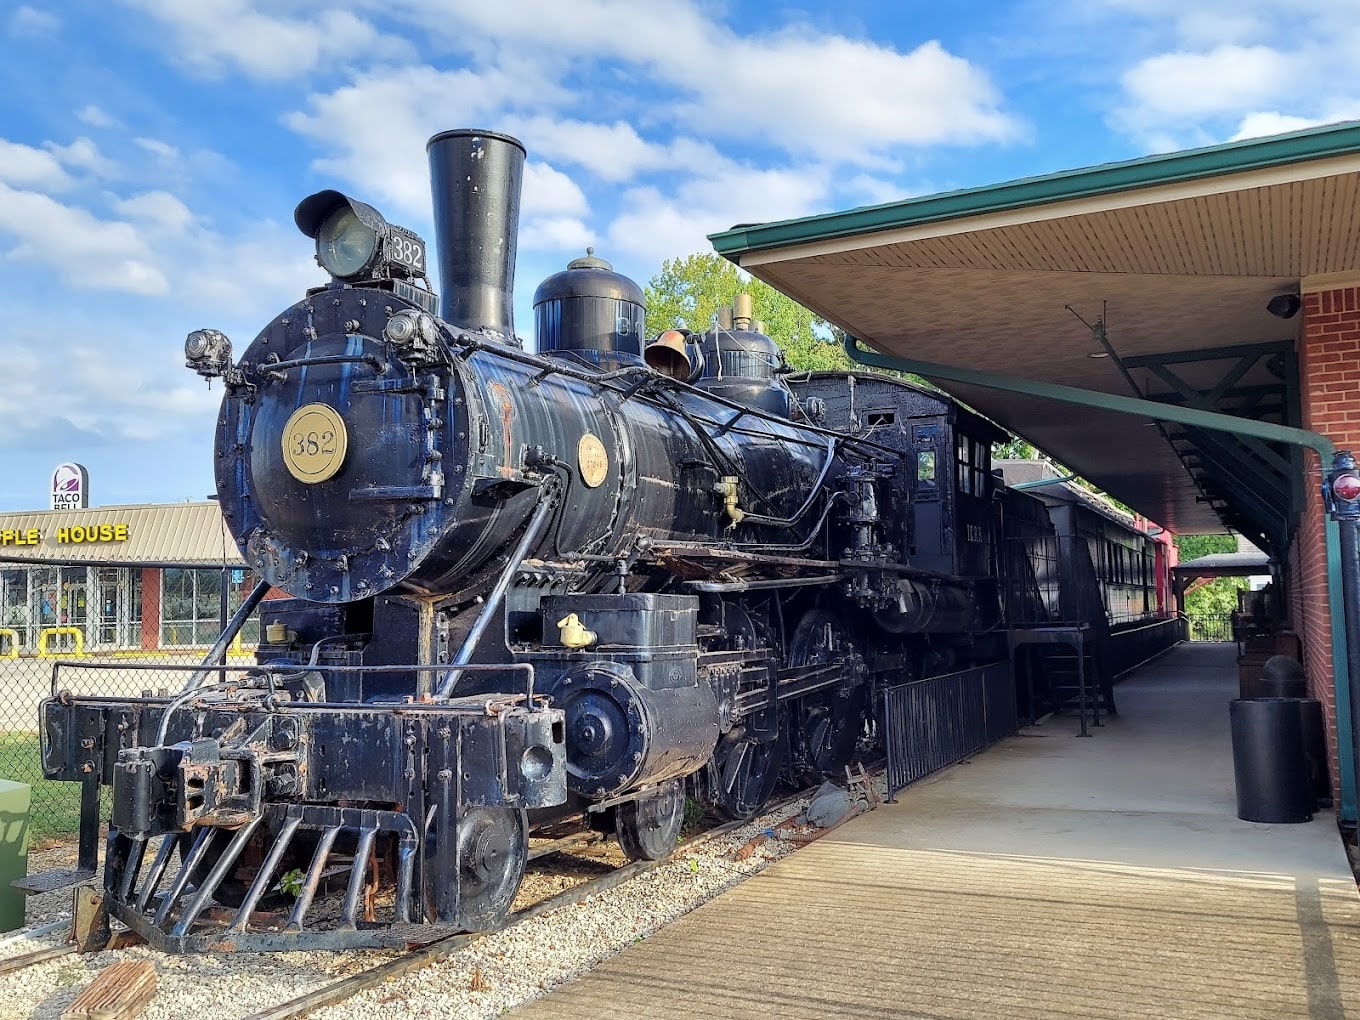 train at the casey jones home and railroad museum in small town of Jackson TN 